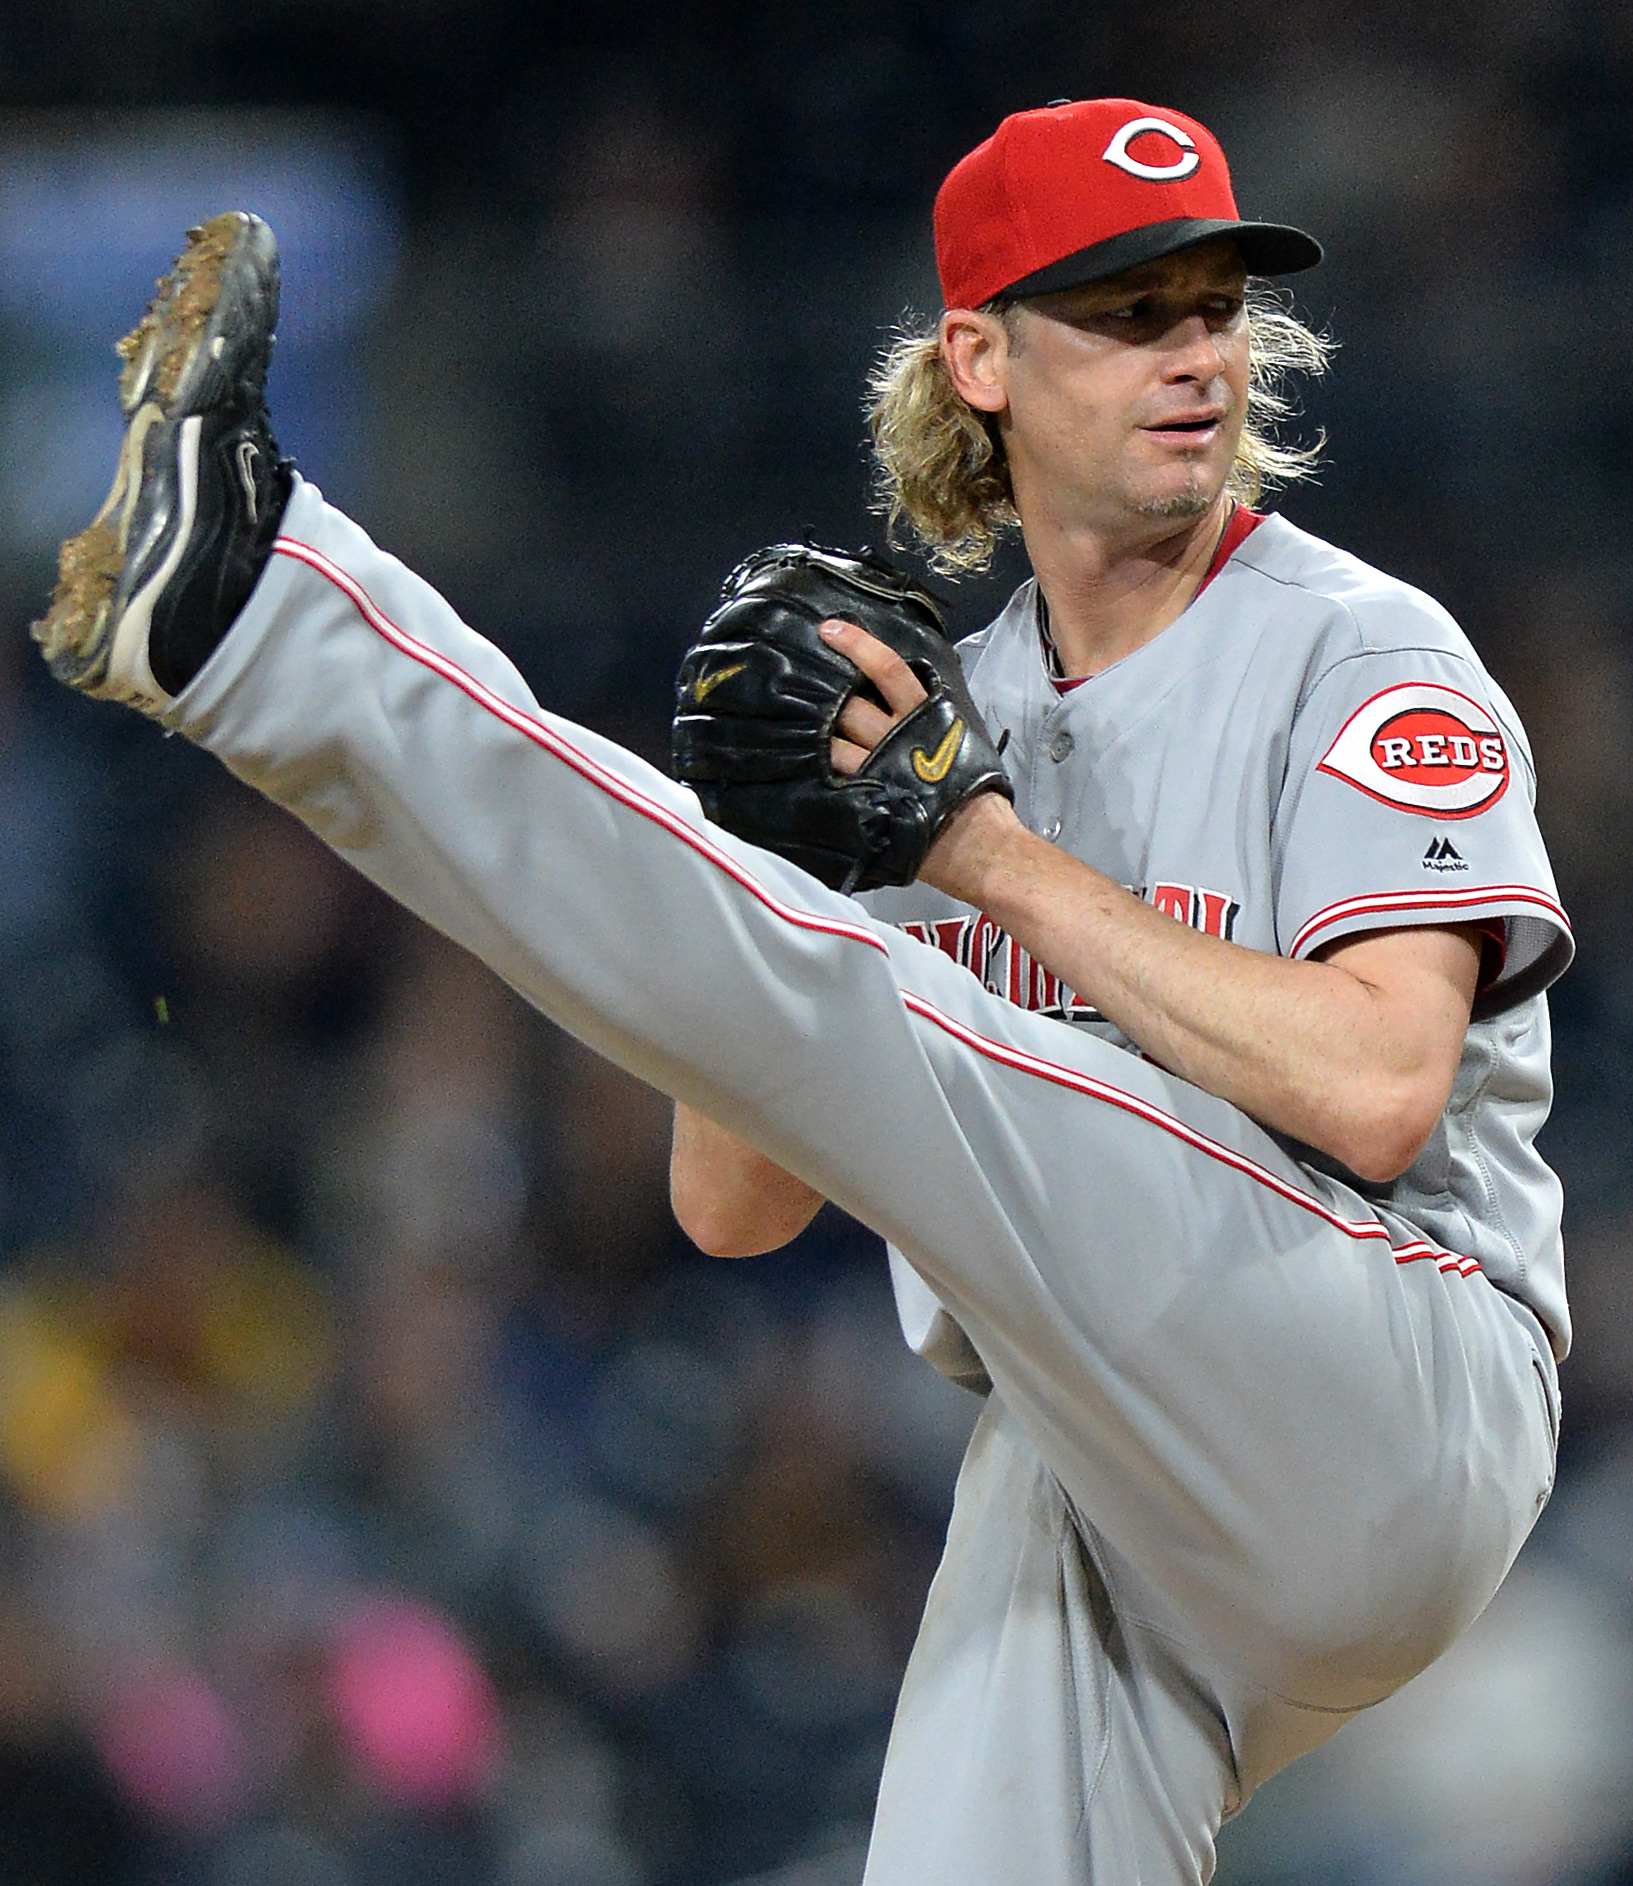 How Bronson Arroyo embraced Cincinnati and the city welcomed him